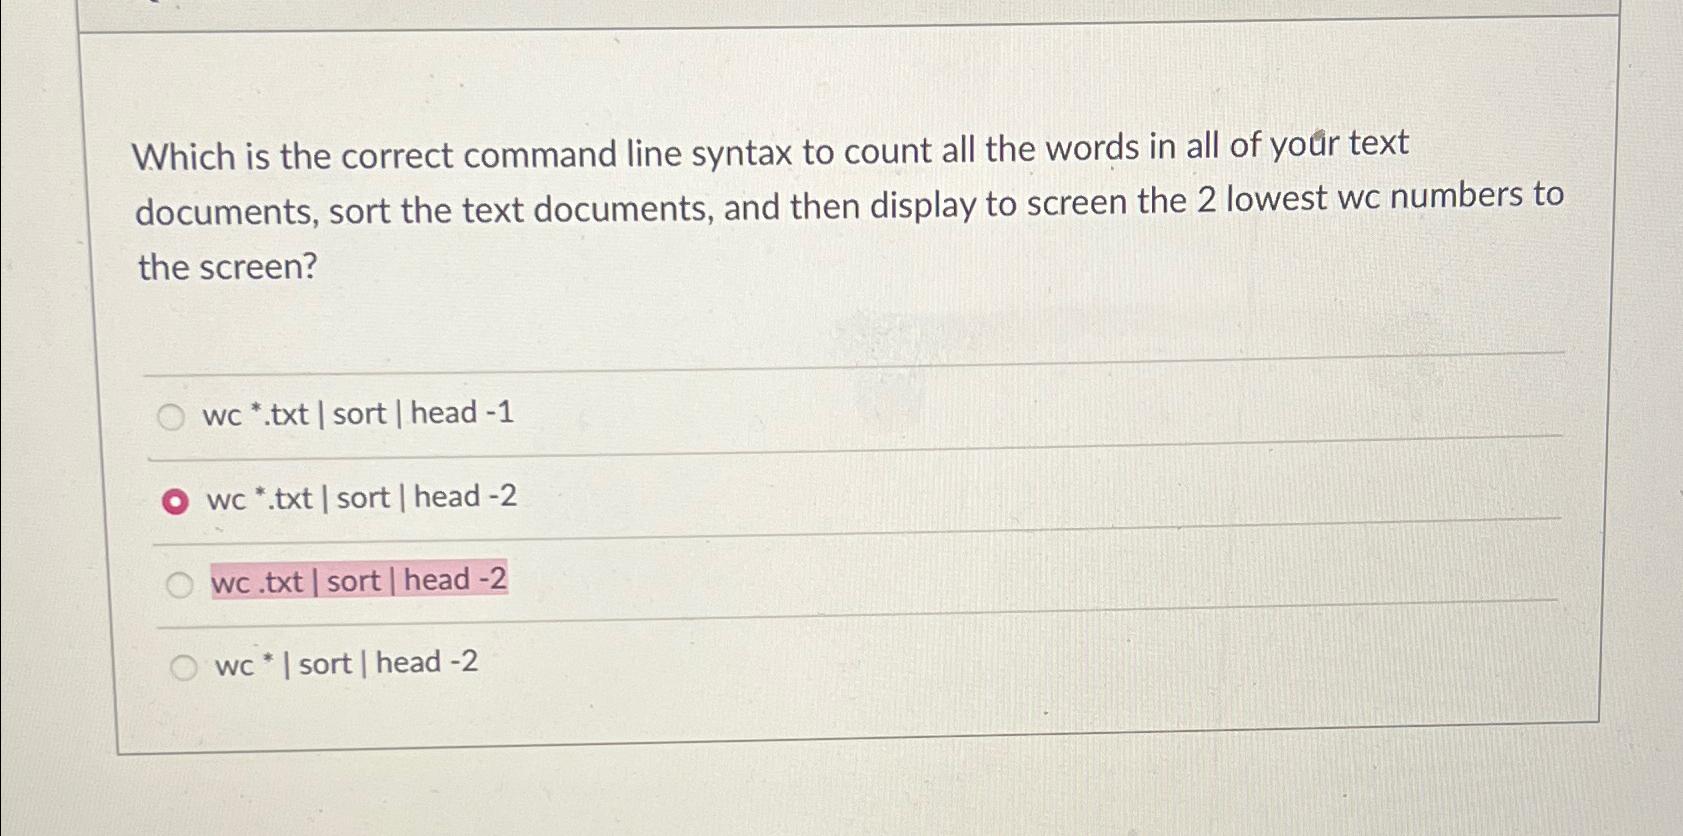 Which is the correct command line syntax to count all the words in all of your text documents, sort the text